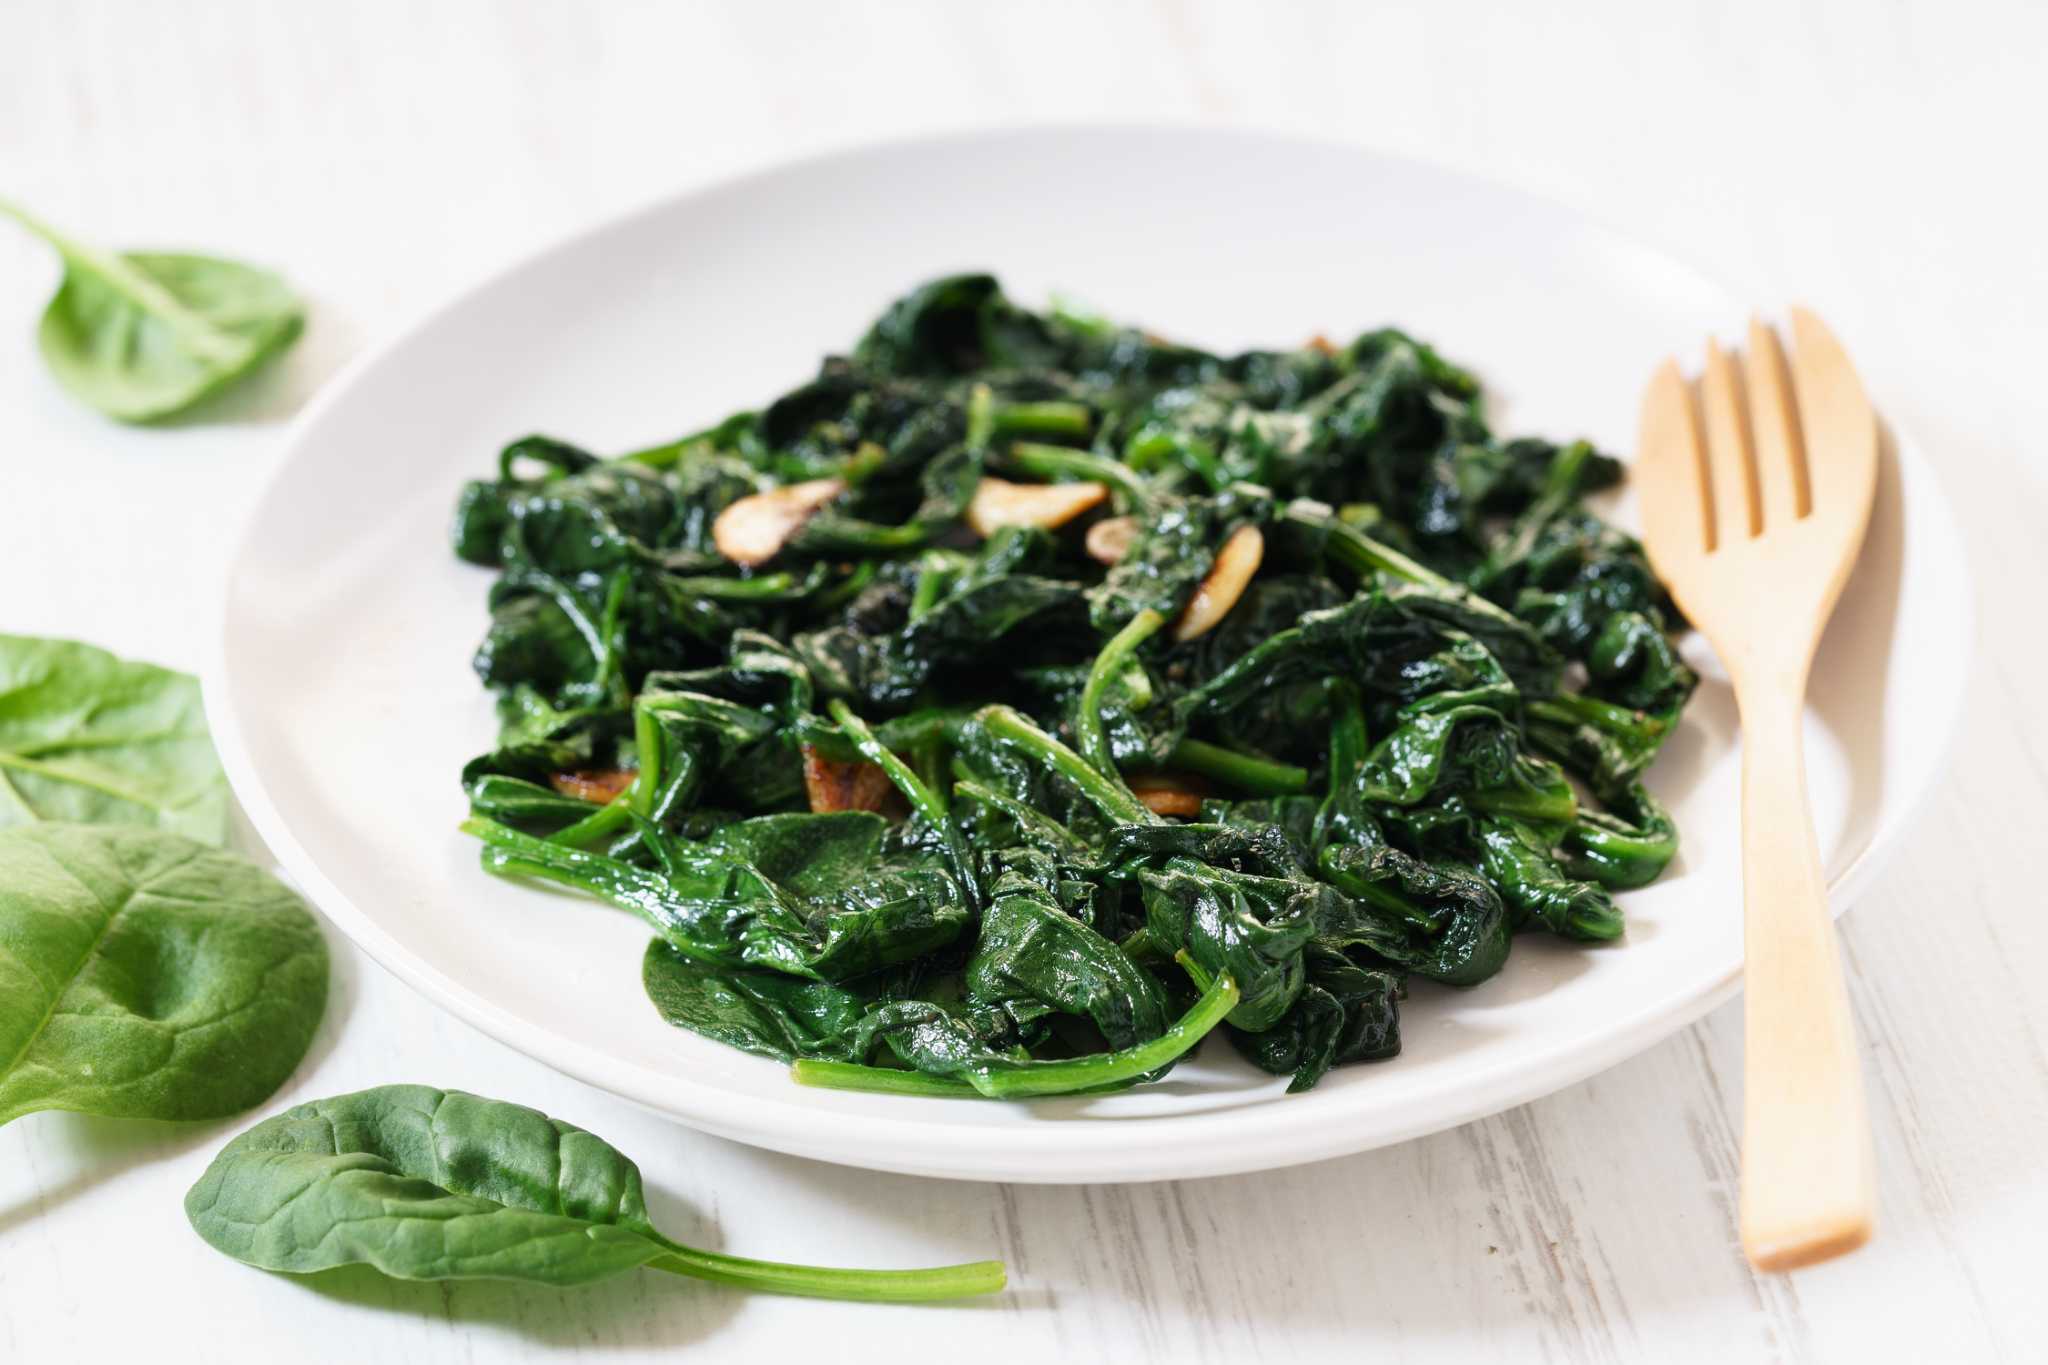 Do You Lose Nutrients in Spinach When You Saute It?